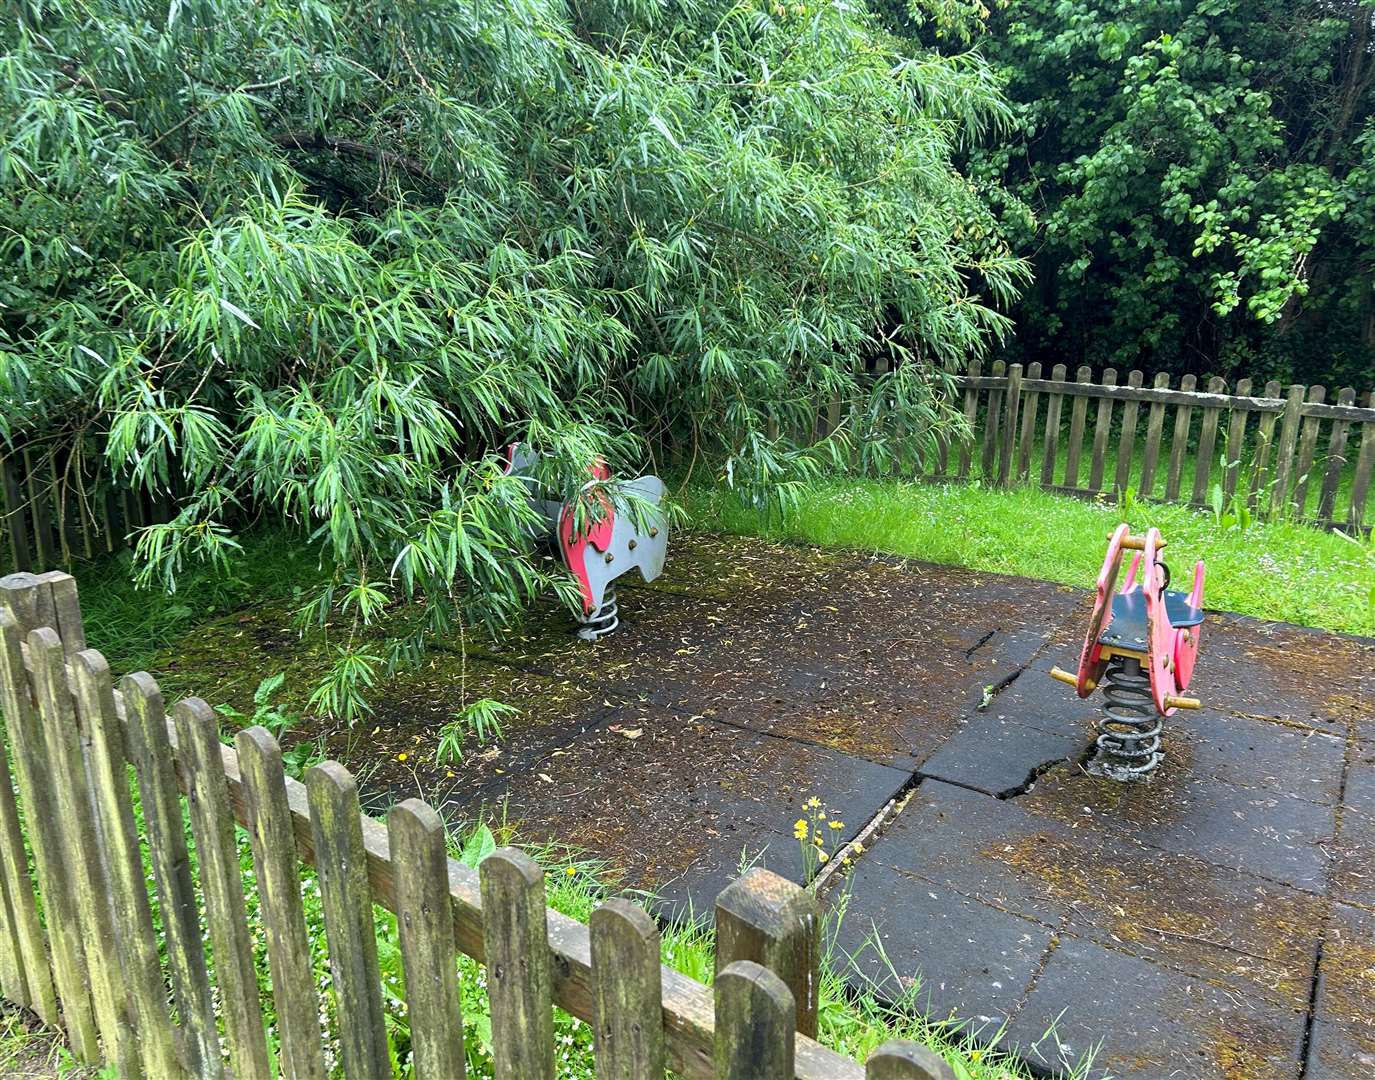 Foliage has swallowed up play equipment at the closed play area at The Oaze in Whitstable